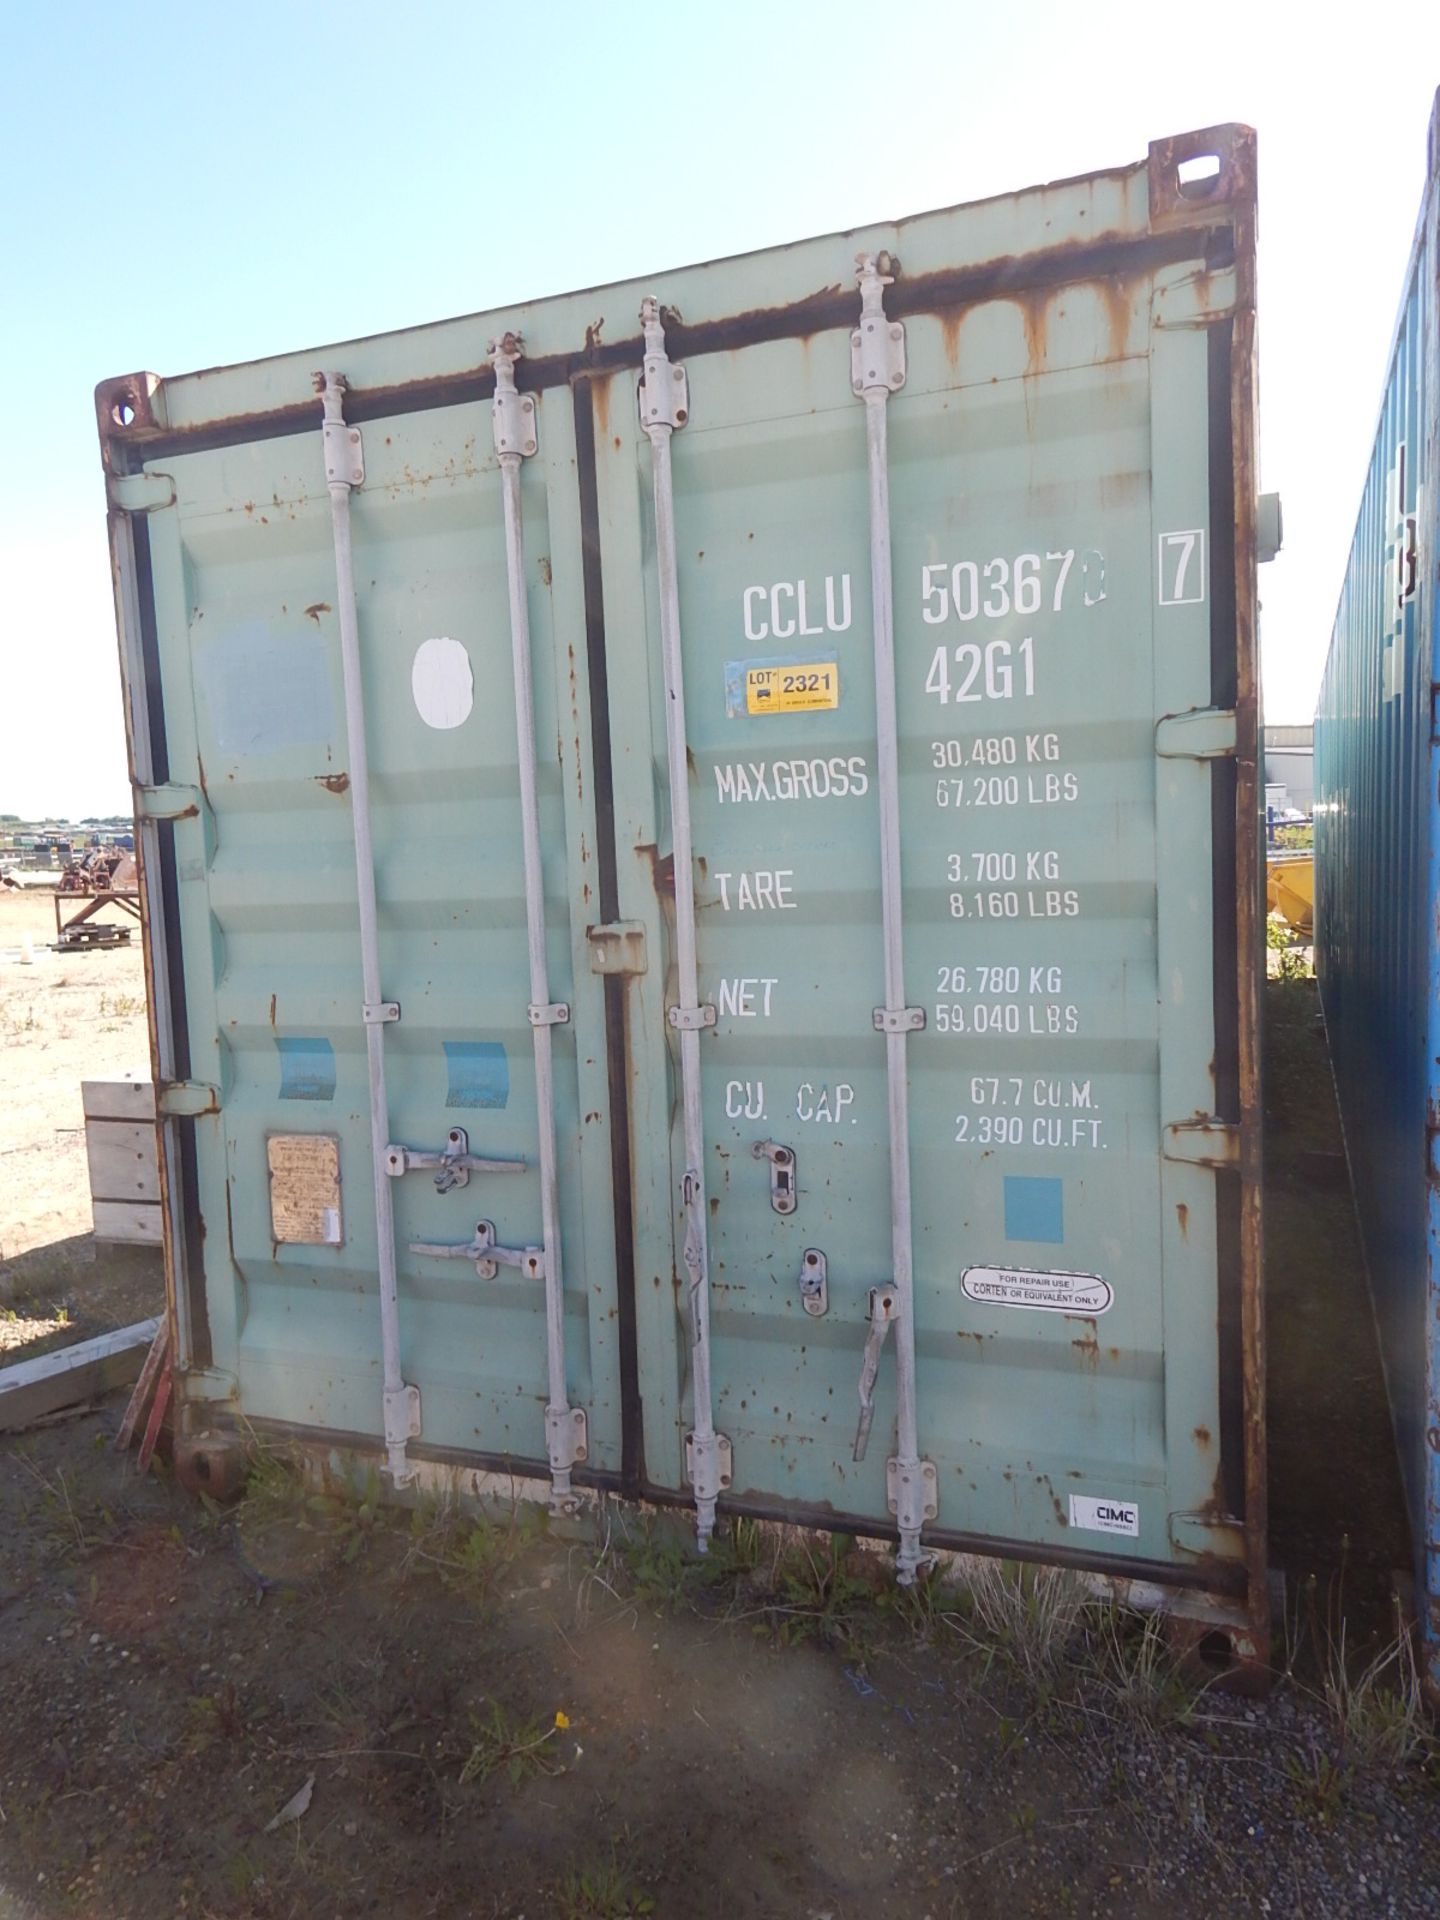 40' SEA CONTAINER, S/N: N/A (CCLU 503670 7) (DELAYED DELIVERY) (CI)